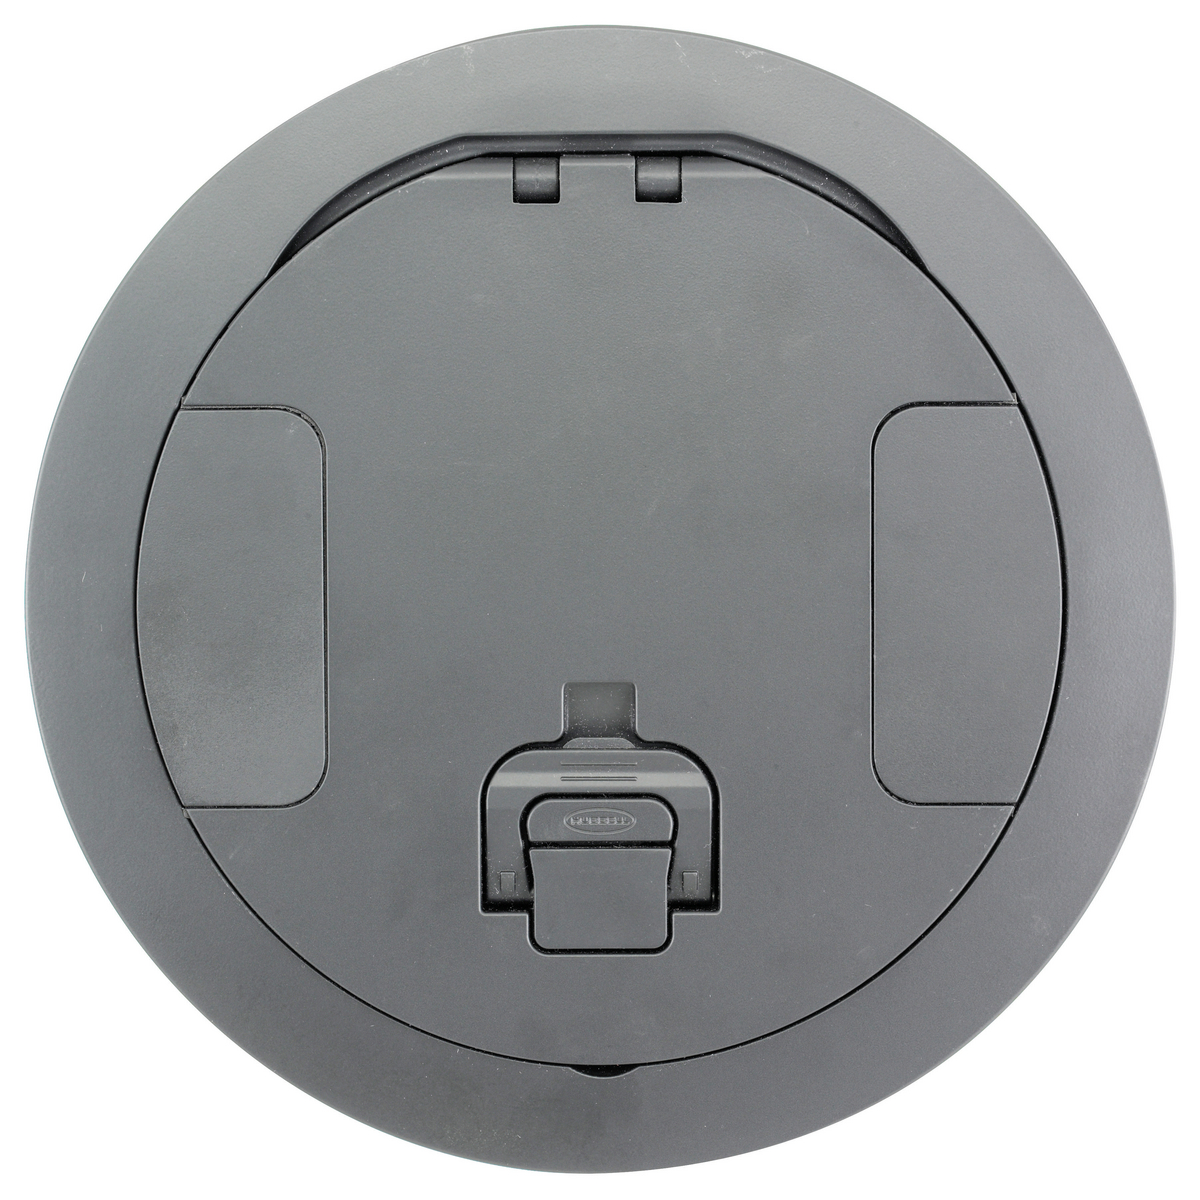 CFB ROUND 8 INCH COVER, GRAY